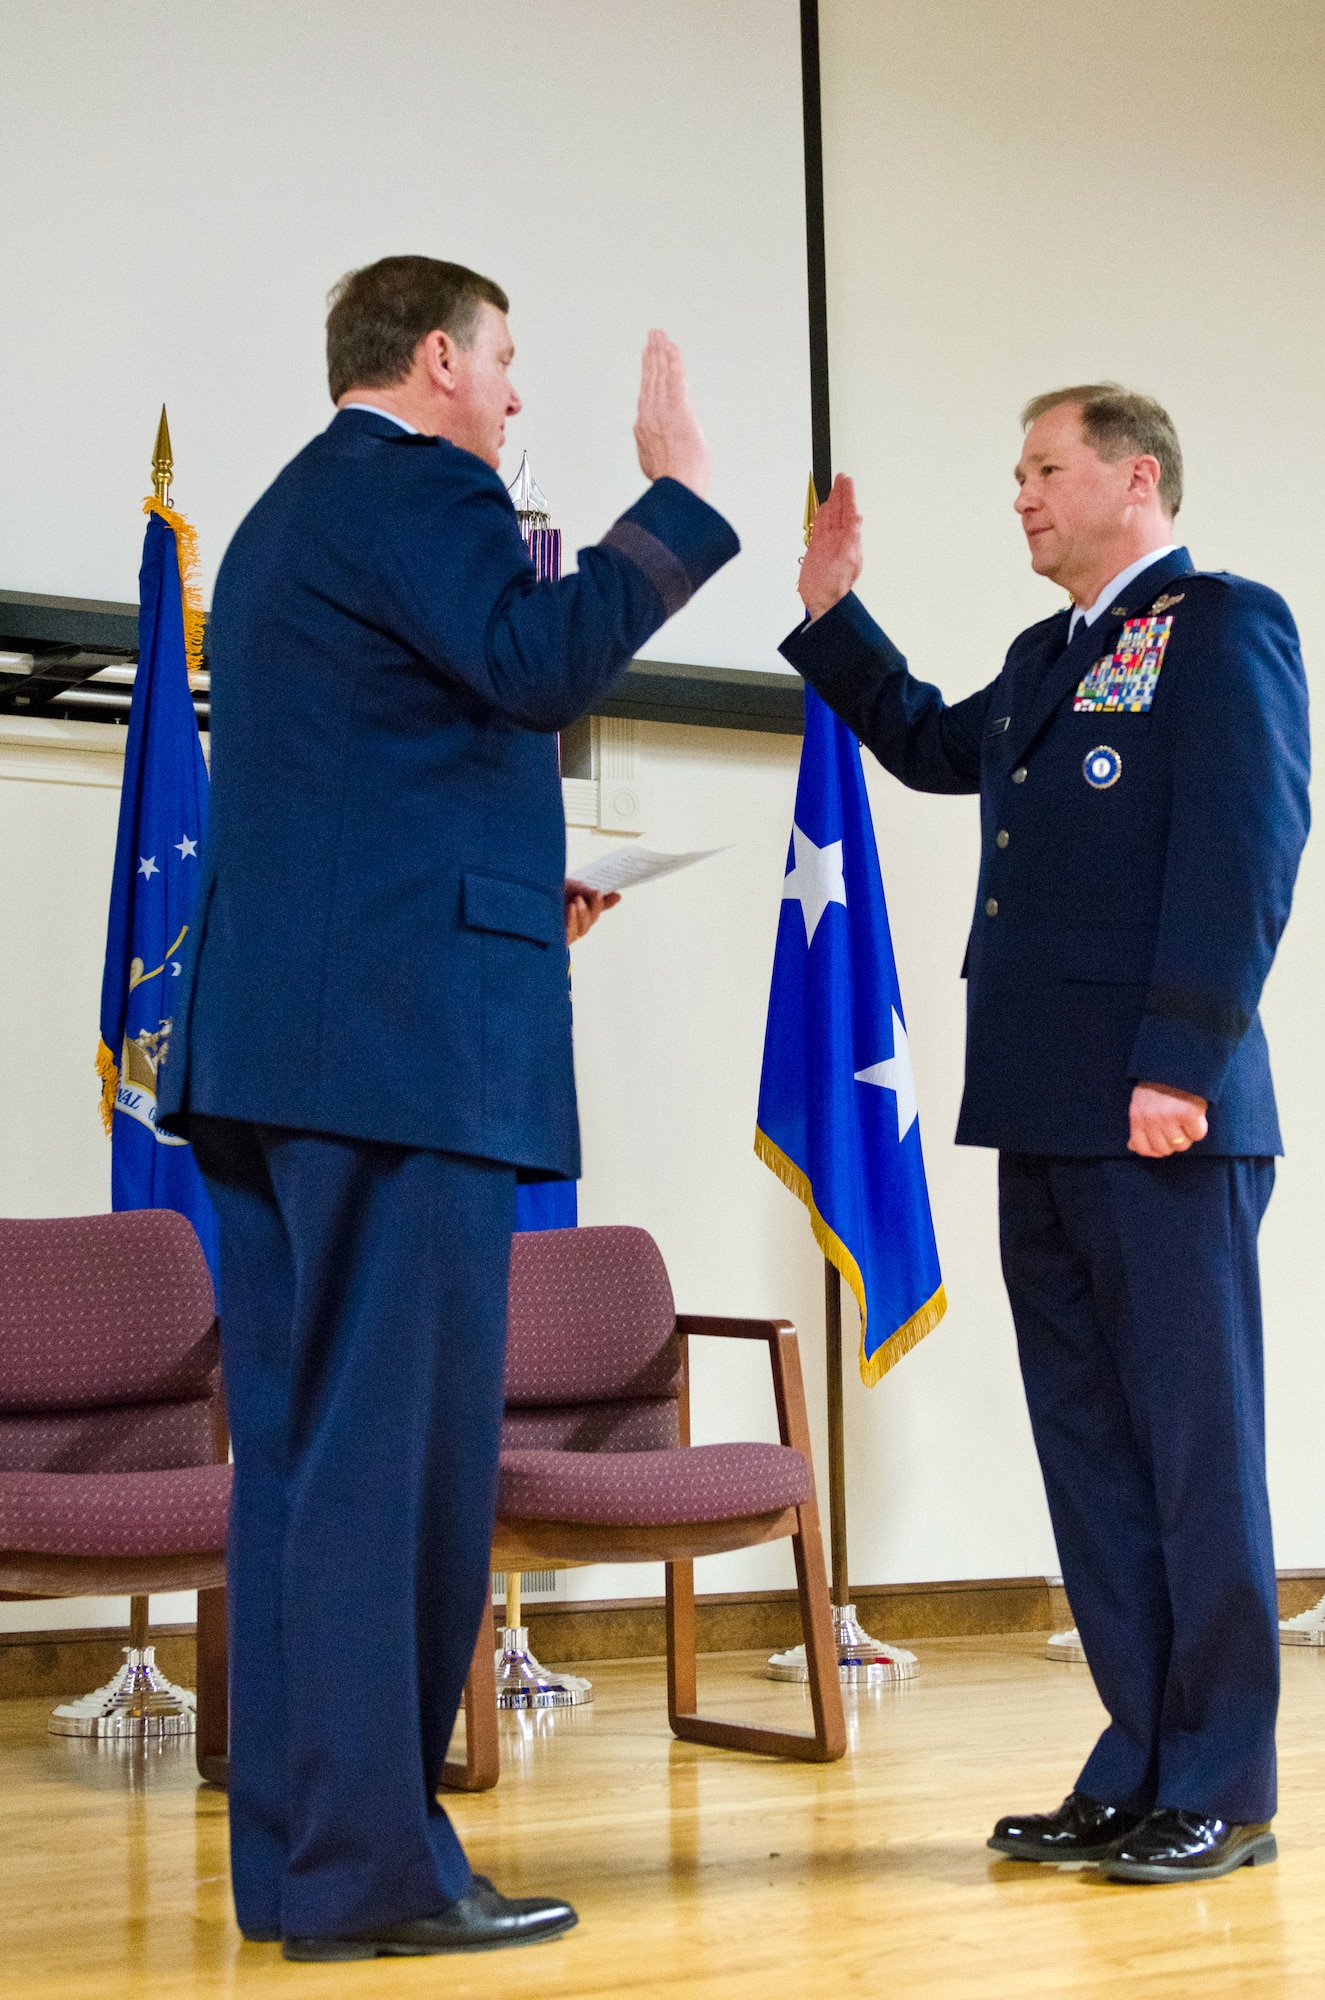 Maj. Gen. Edward W. Tonini (left), adjutant general of the Commonwealth of Kentucky, administers the oath of office to Brig. Gen. Steven P. Bullard, chief of staff for Headquarters, Kentucky Air National Guard, during a promotion ceremony for Bullard held Feb. 7, 2015, at the Kentucky Air National Guard Base in Louisville, Ky. Bullard is responsible to the assistant adjutant general for Air and to the adjutant general for coordination of policy guidance and the direction of more than 8,500 Kentucky Army and Air National Guardsmen. (U.S. Air National Guard photo by Master Sgt. Phil Speck)